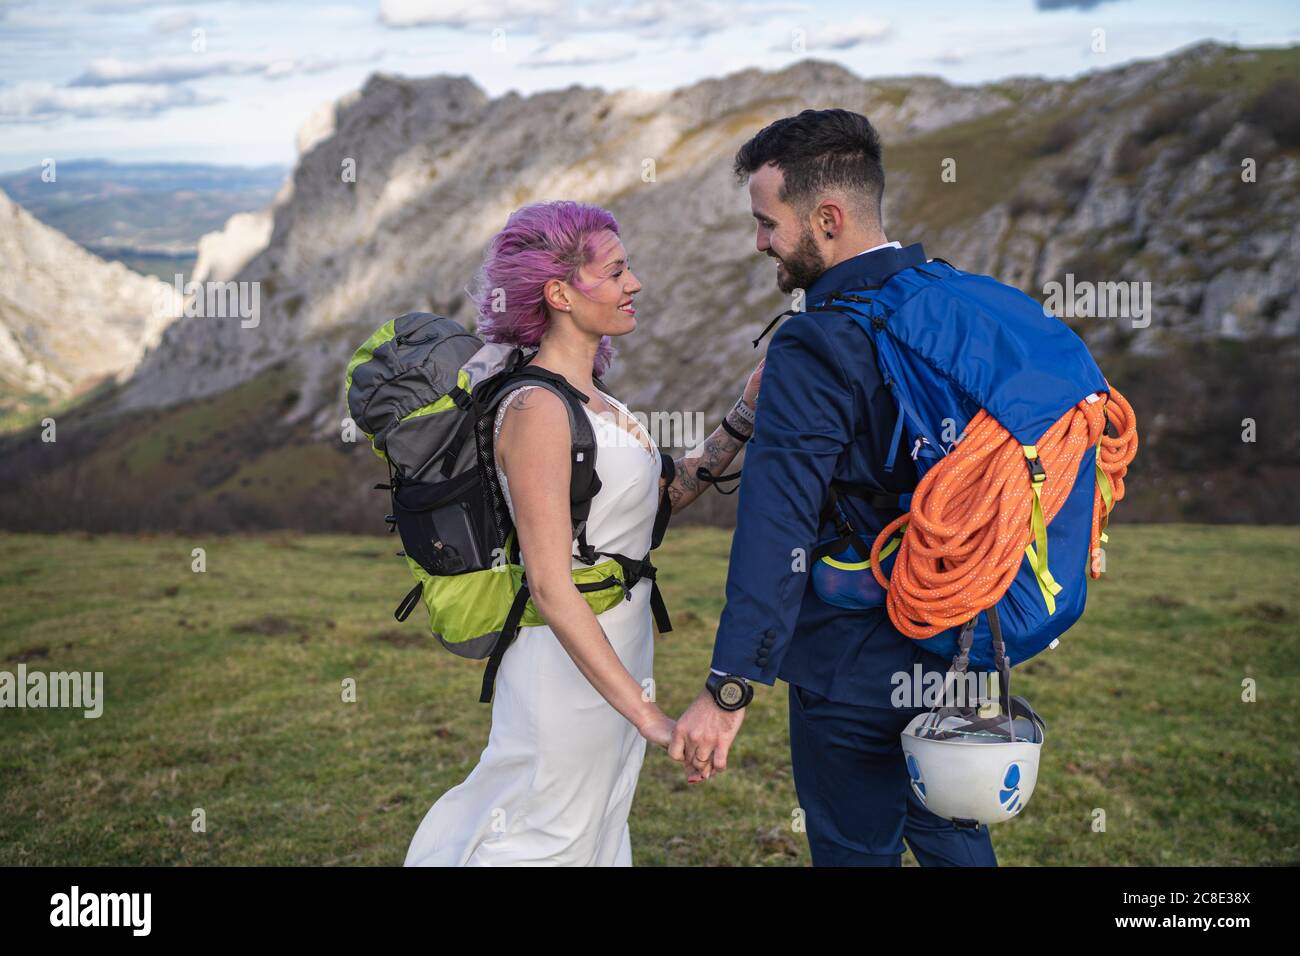 Bridal couple with climbing backpacks at Urkiola mountain, Spain Stock Photo